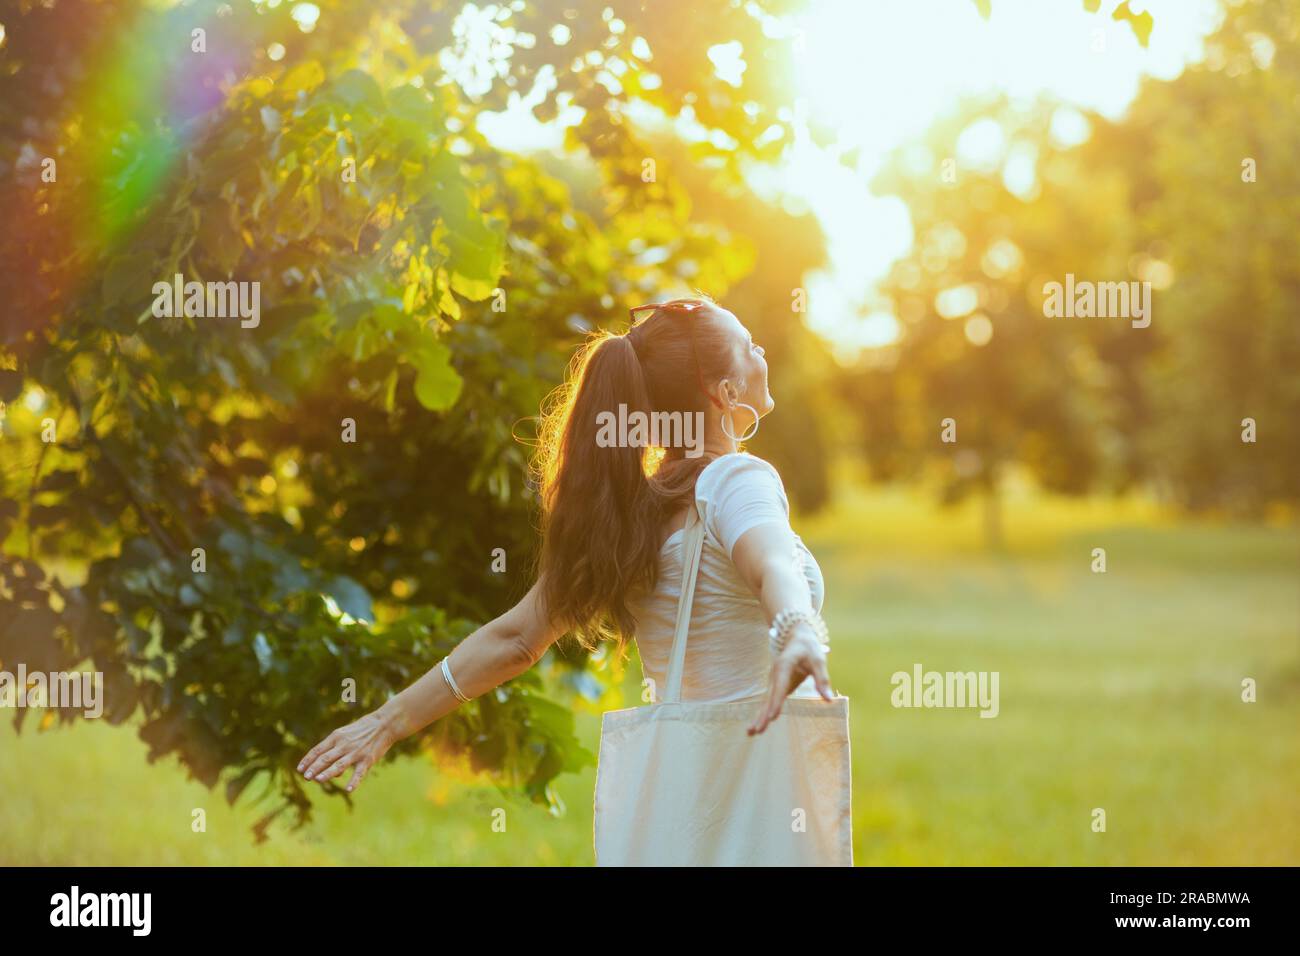 Summer time. smiling modern woman in white shirt outdoors. Stock Photo